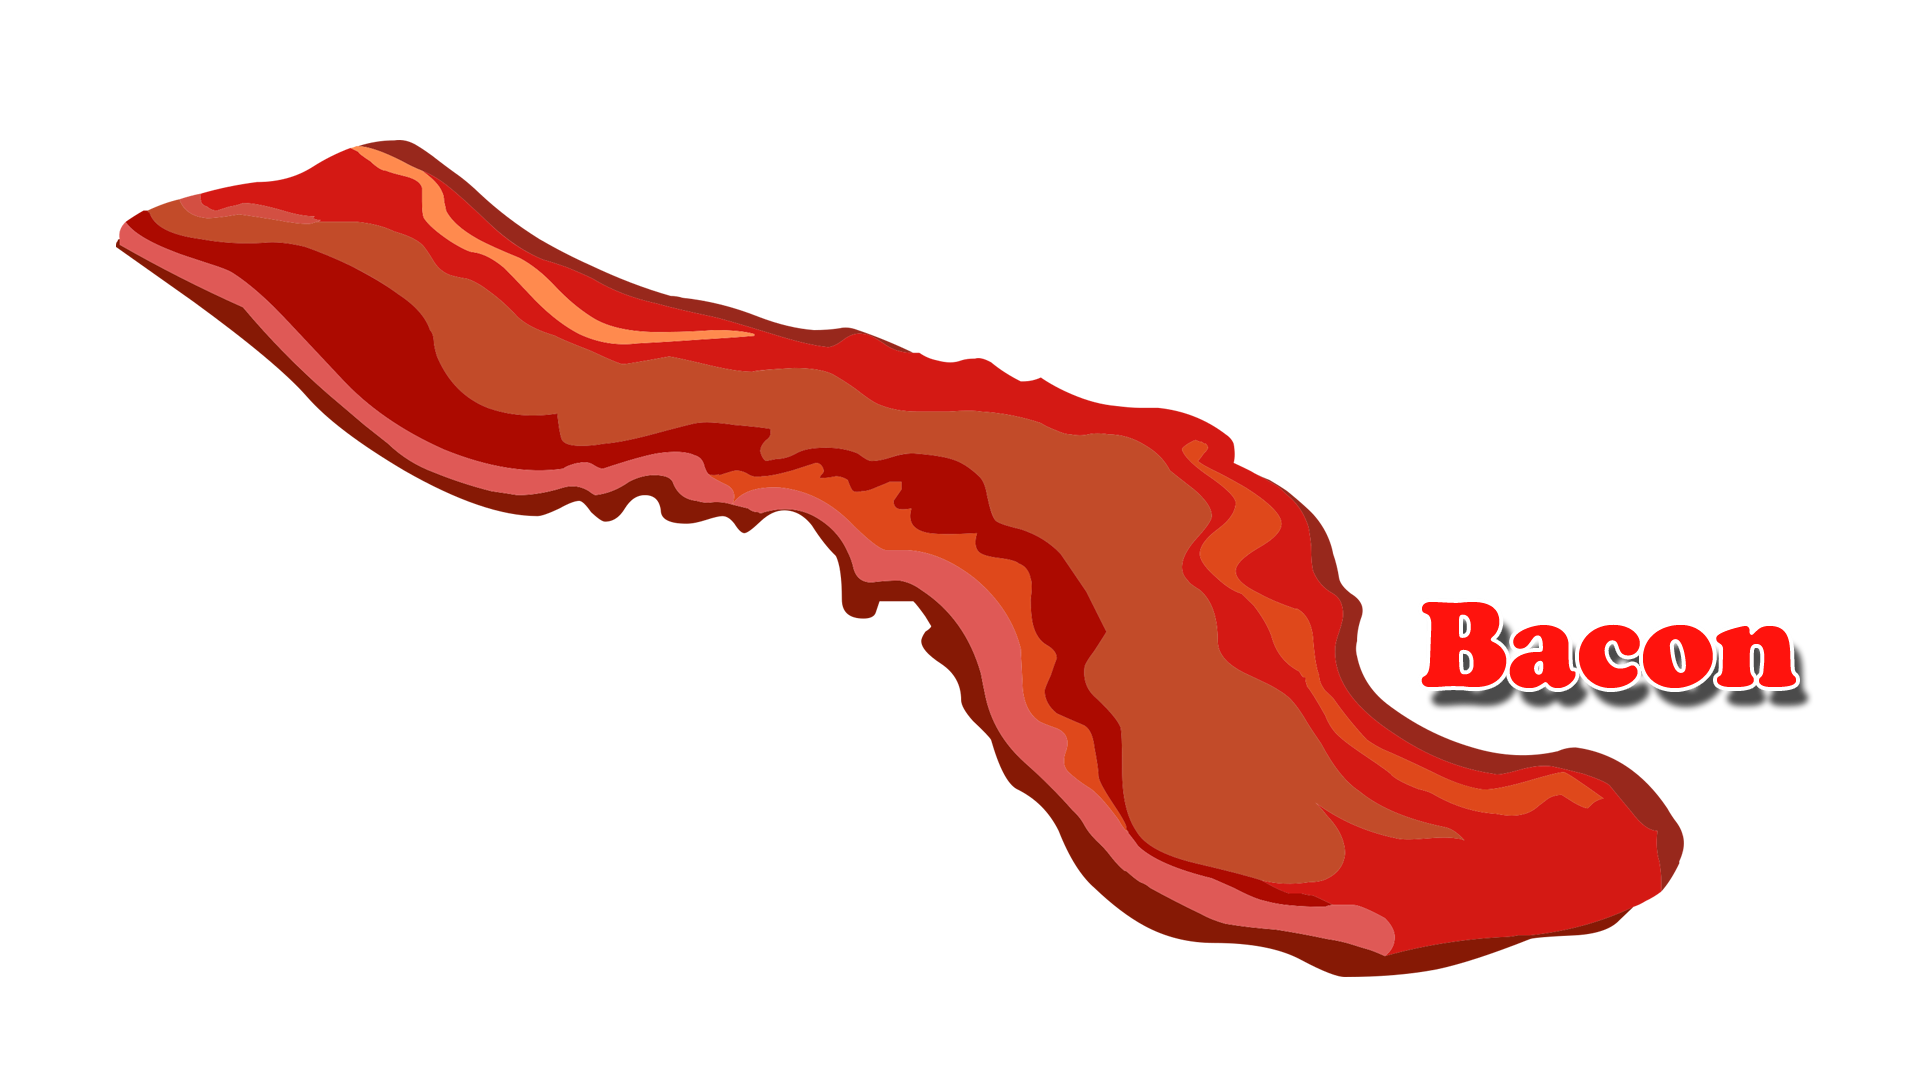 Bacon clipart flatworm. Name png ready made